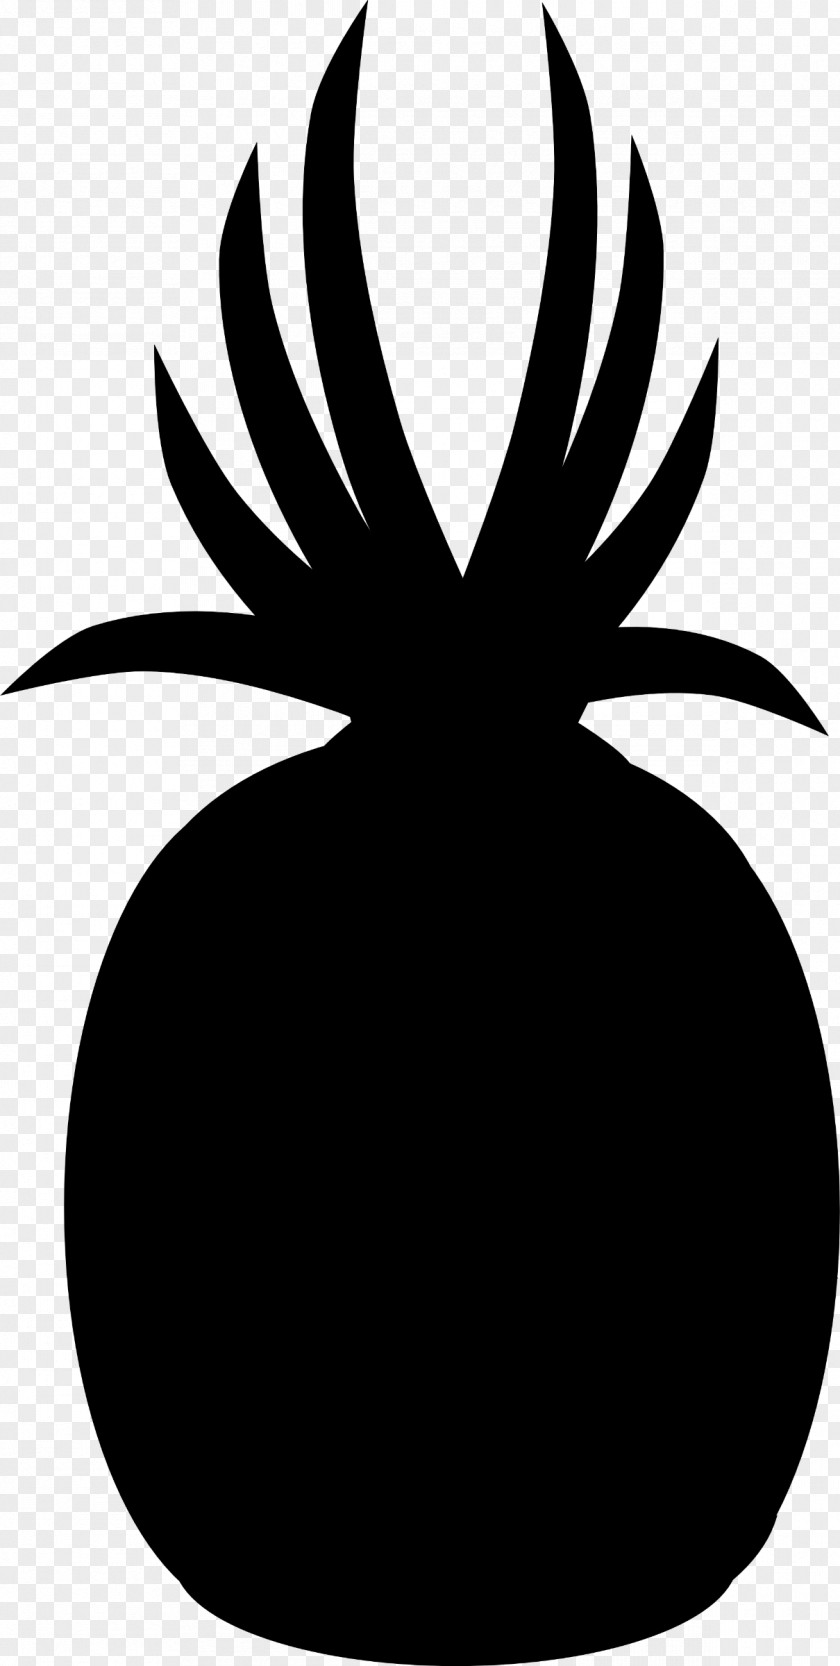 Pineapple Upside-down Cake Silhouette PNG